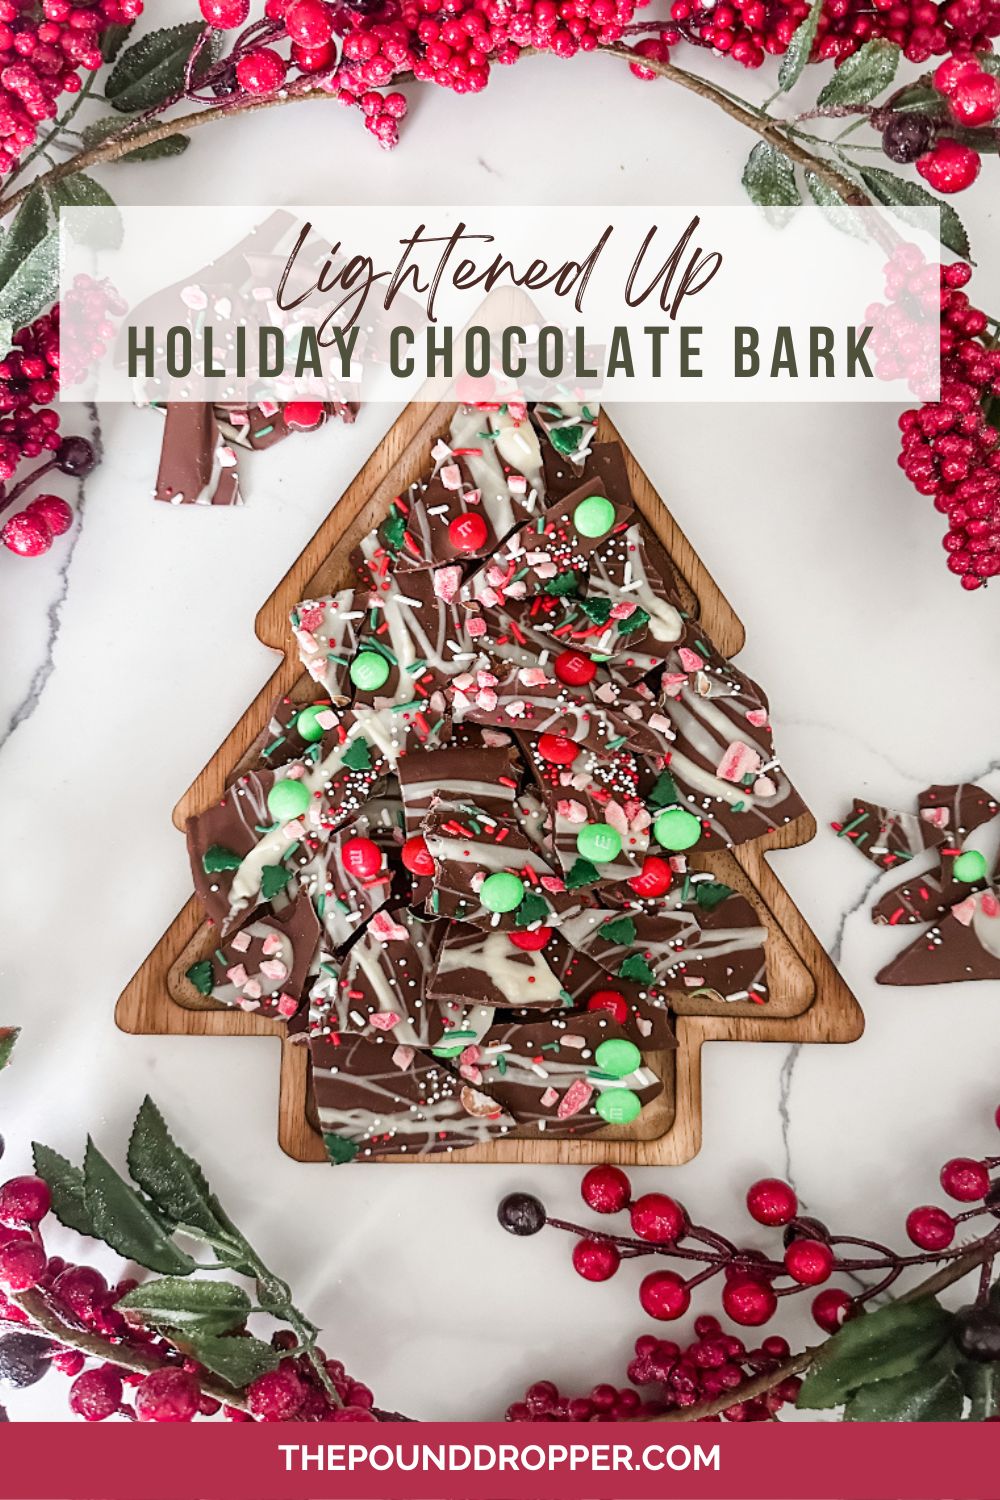  This Lightened Up Holiday Chocolate Bark  is pretty much the easiest treat you can possibly make. With endless flavor possibilities! This bark requires only a few ingredients and takes less than 5 minutes to put together! via @pounddropper